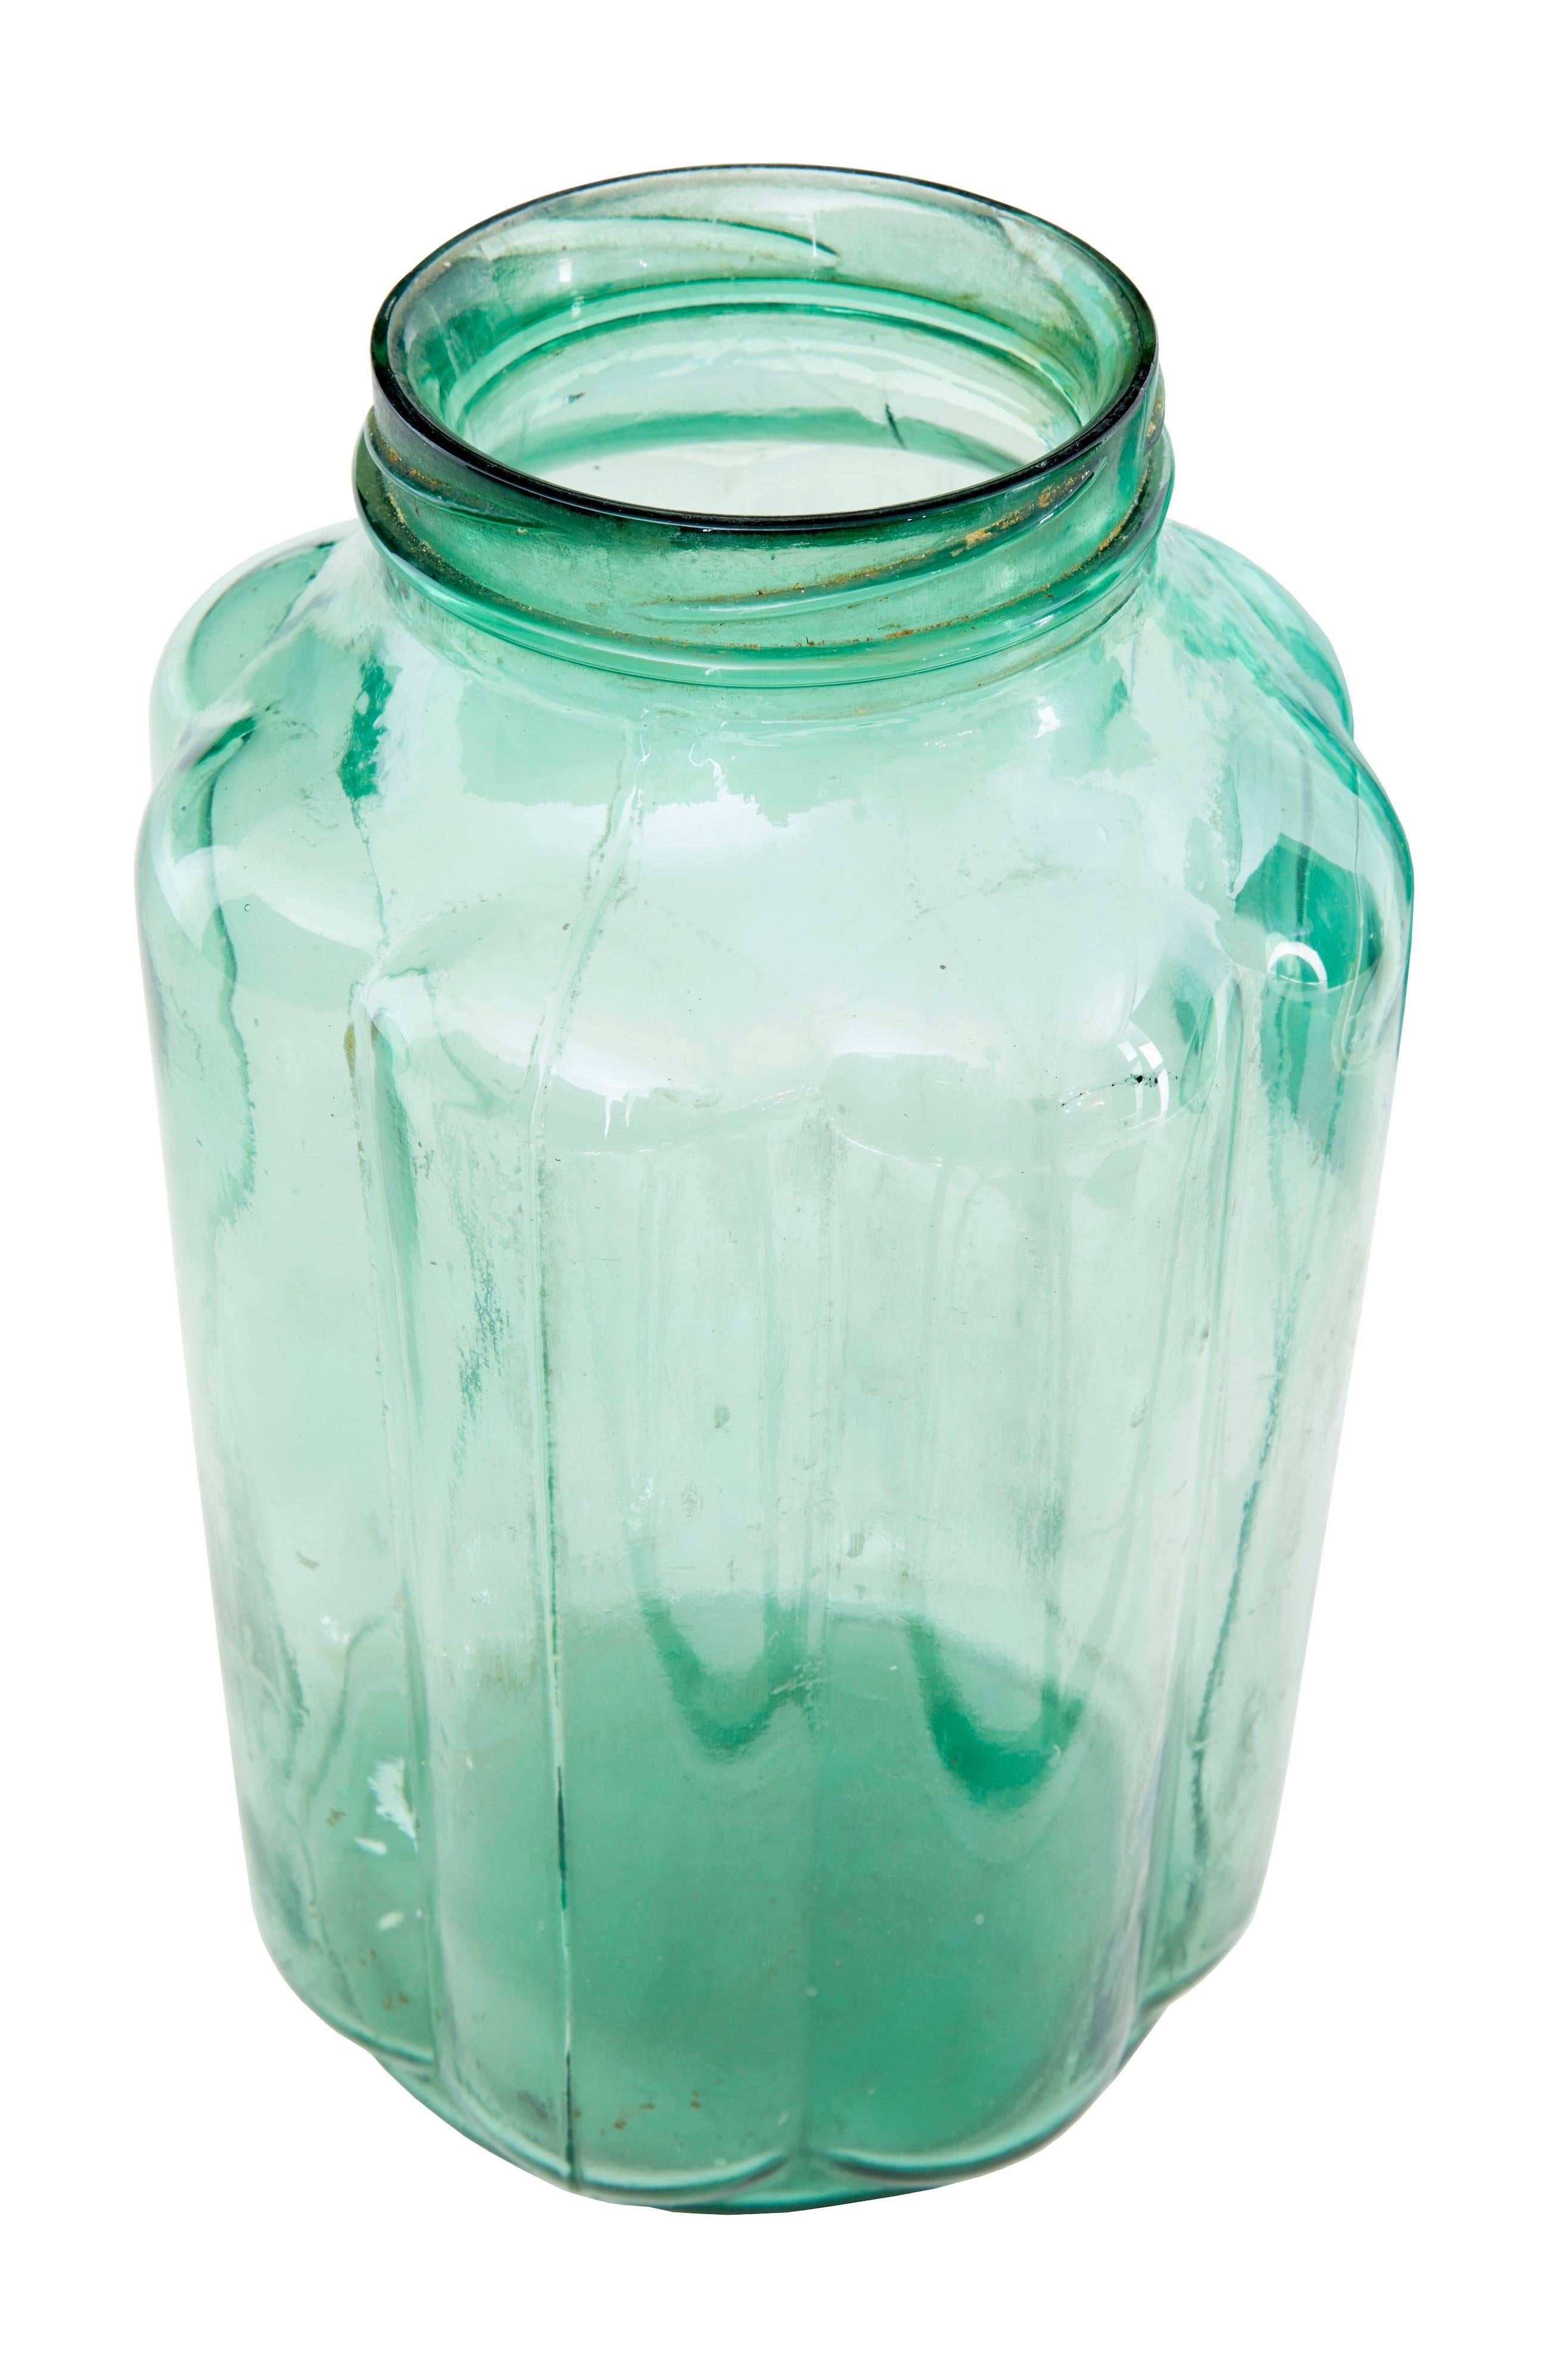 Unusual collection of cucumber preserving jars, circa 1900. Now ideal for beautiful decorative vases. Originally would have had screw on lids which are no longer present. Deep green color with organic cucumber shaping.

Measure: Height